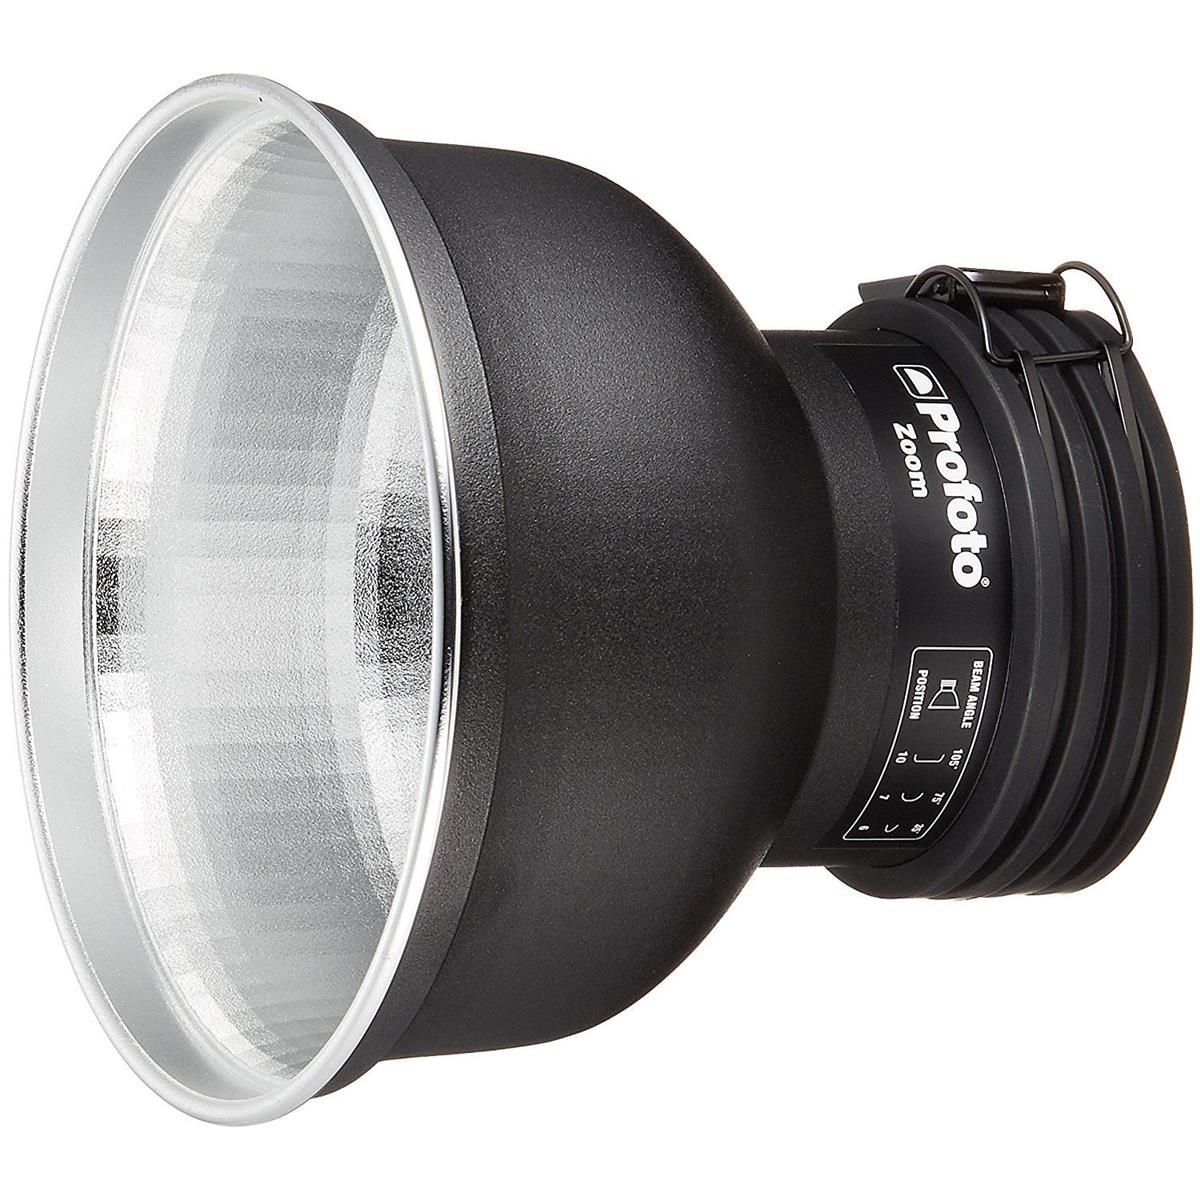 Image of Profoto 100785 Zoom Reflector 2 - Accepts Profoto Grids